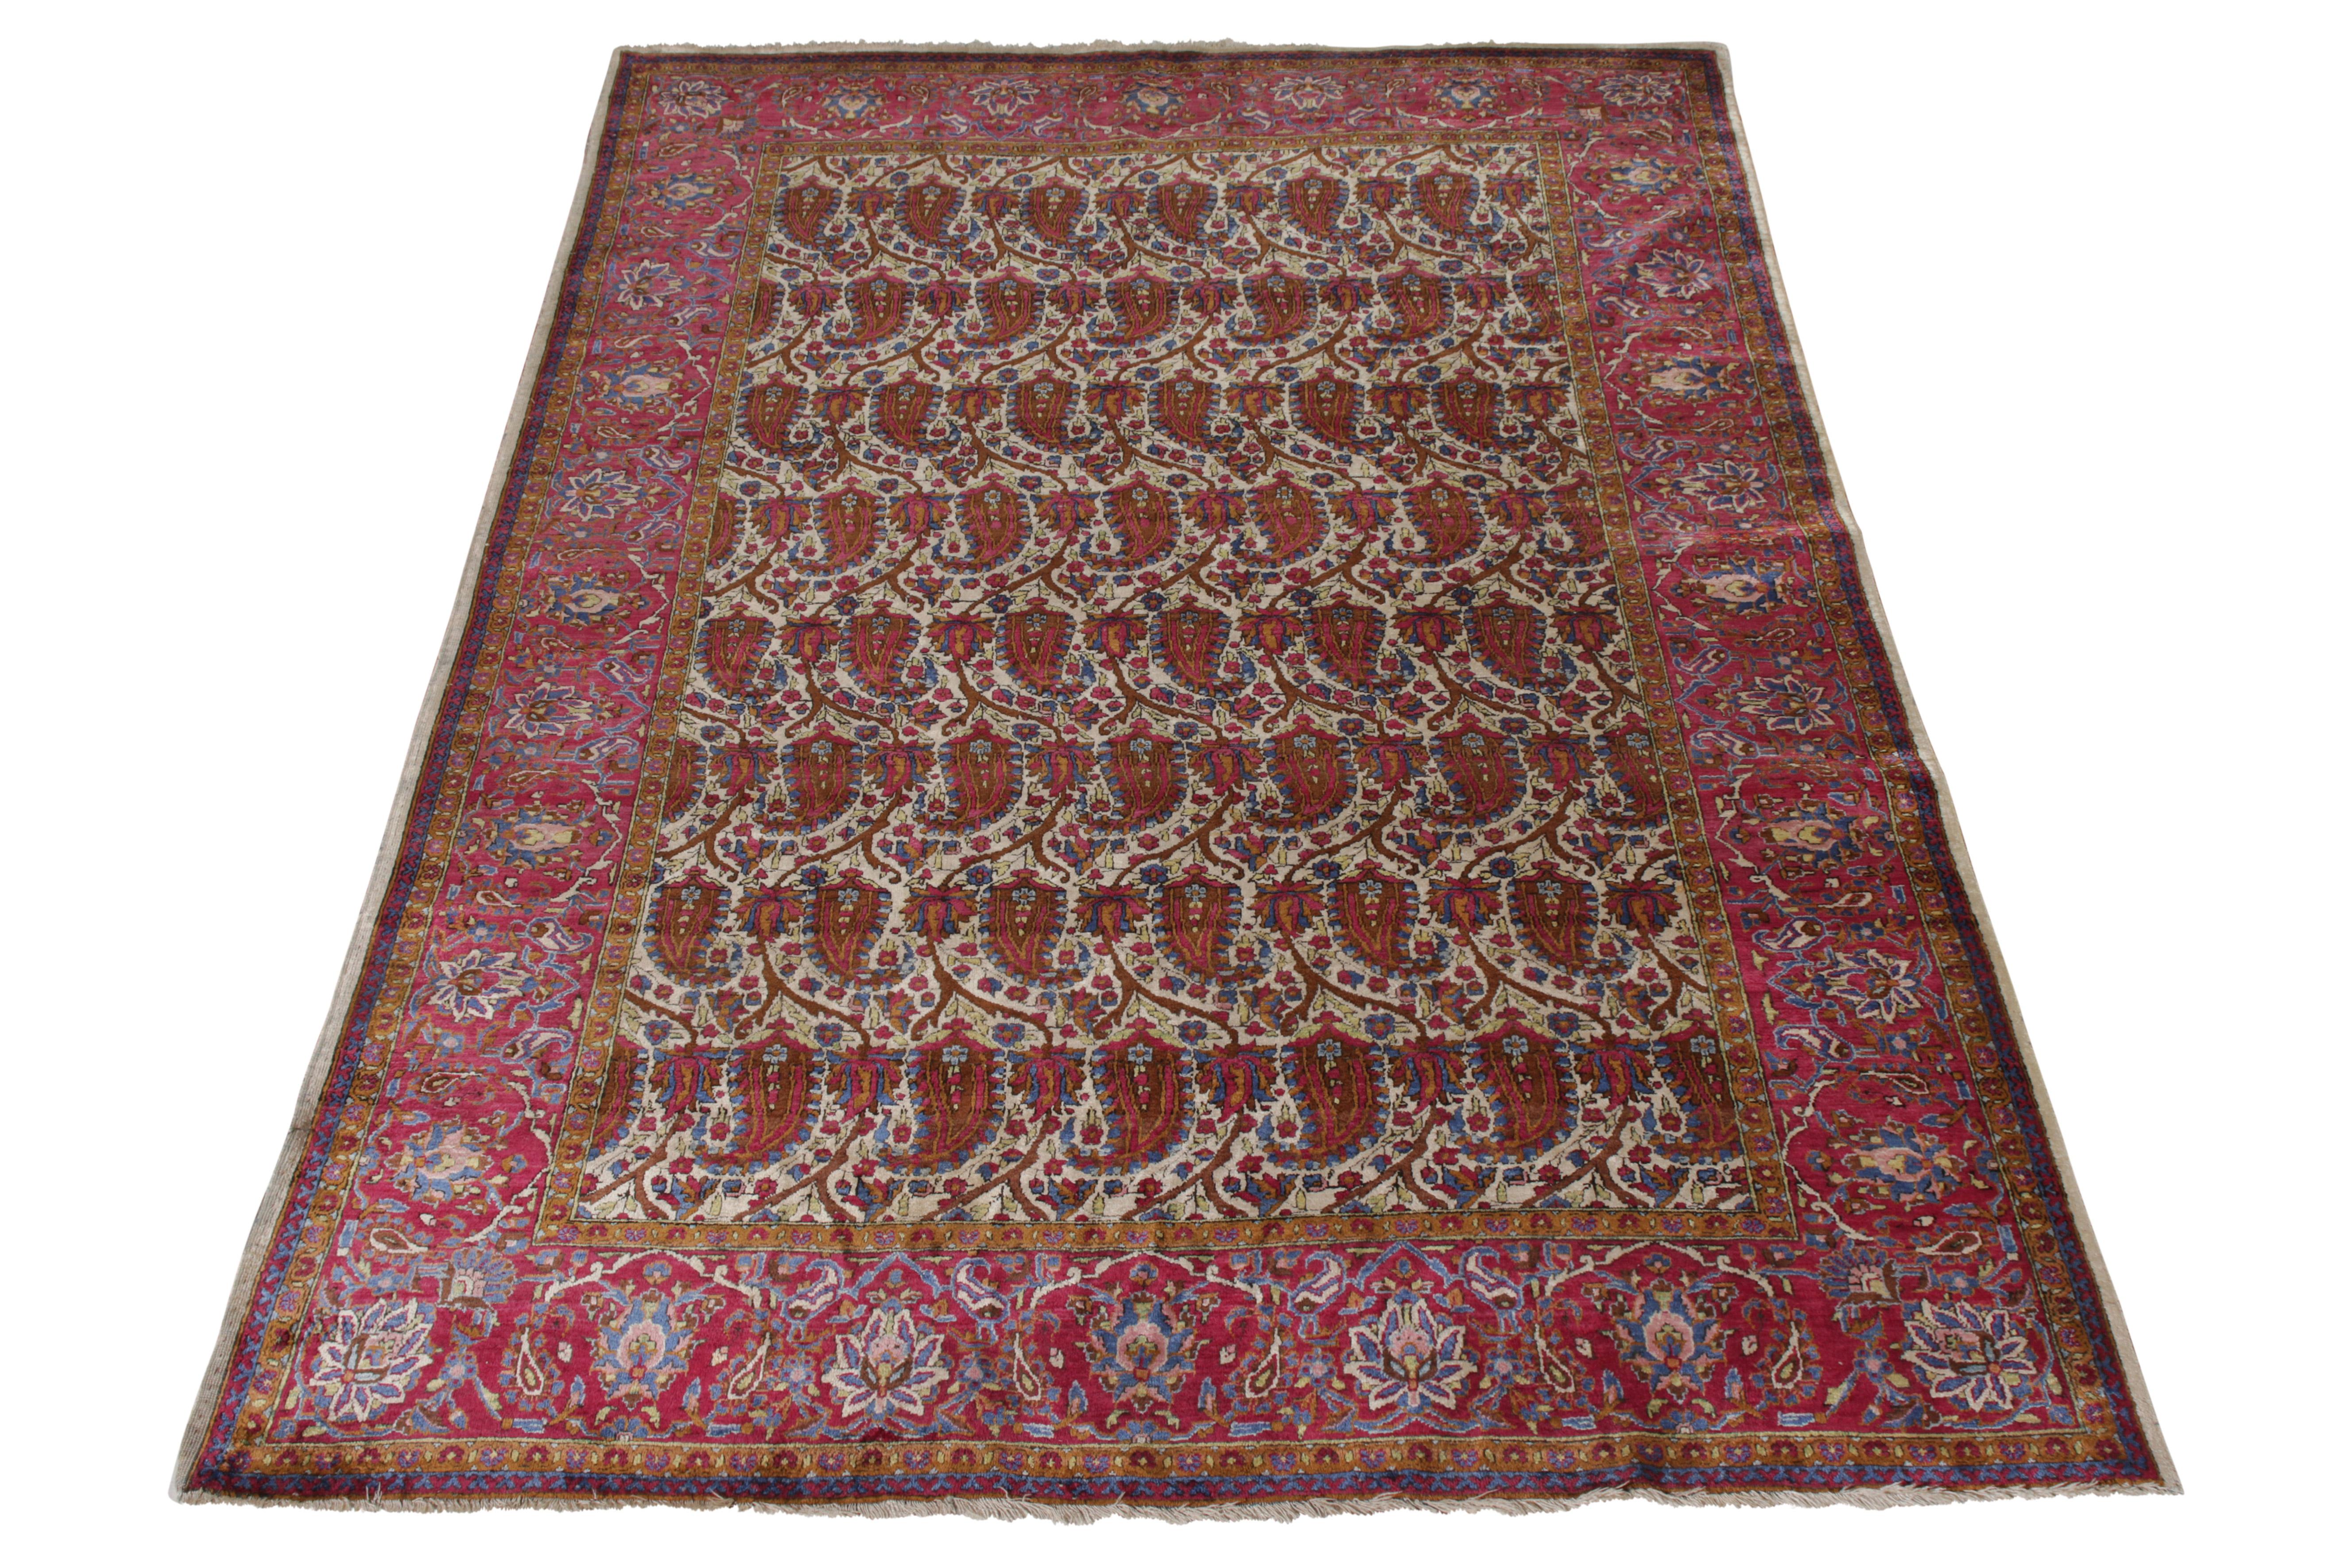 A 4x7 antique Persian rug of renowned Kashani origin, honoring classic paisley patterns in prevalent red and beige-brown hues. Hand knotted in wool circa 1910-1920, an antique Kashan rug both celebrating traditional designs and exemplifying its